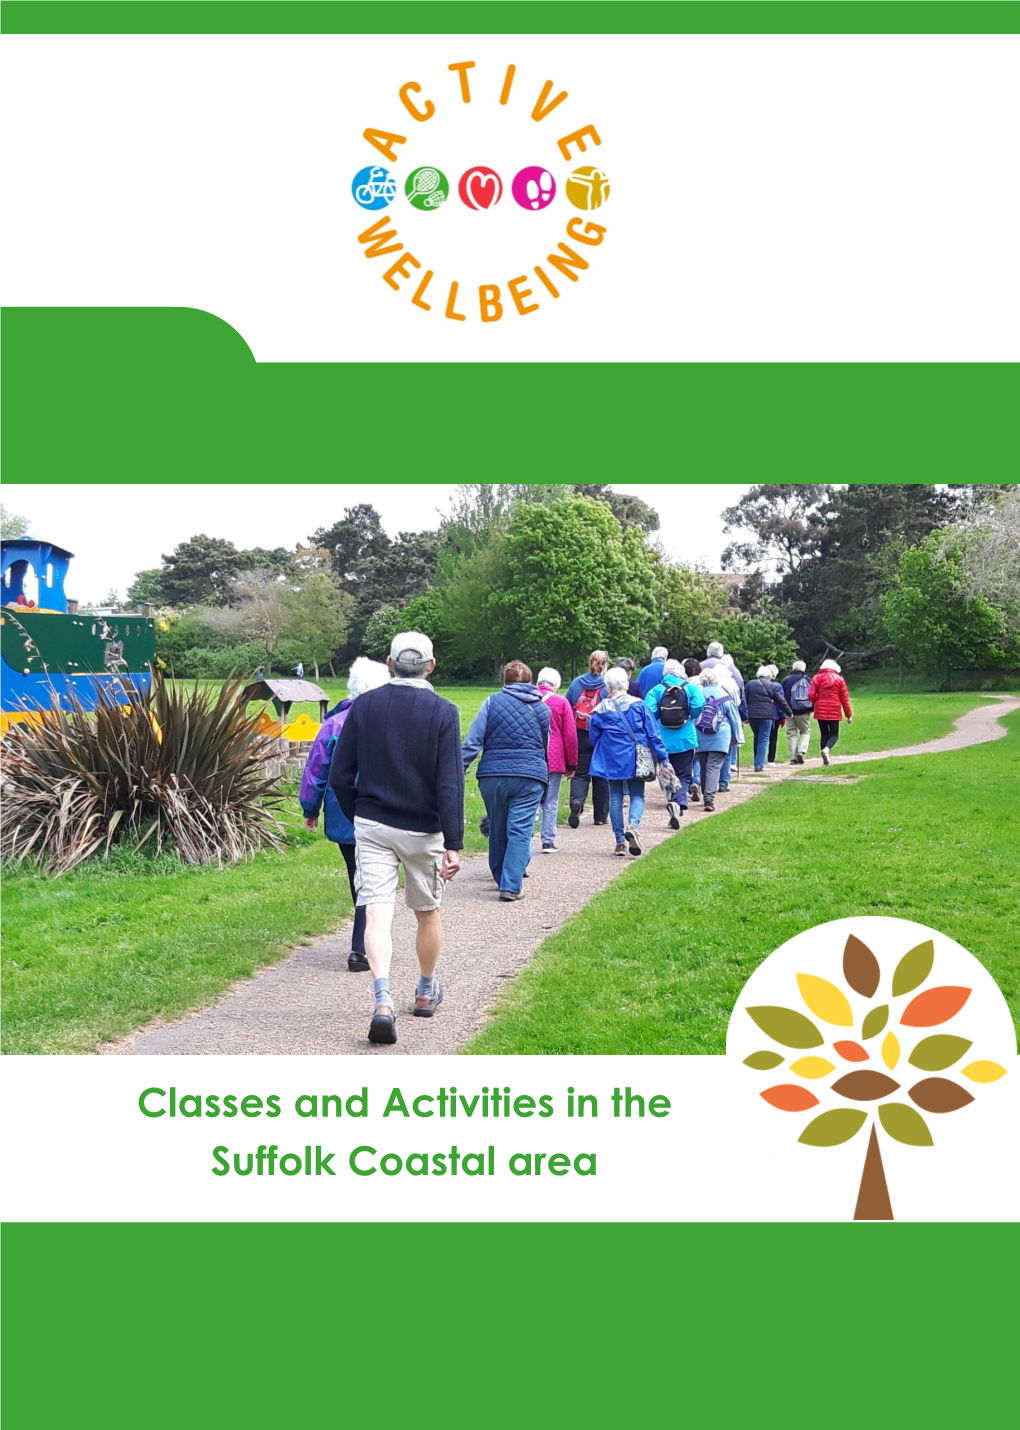 Classes and Activities in the Suffolk Coastal Area